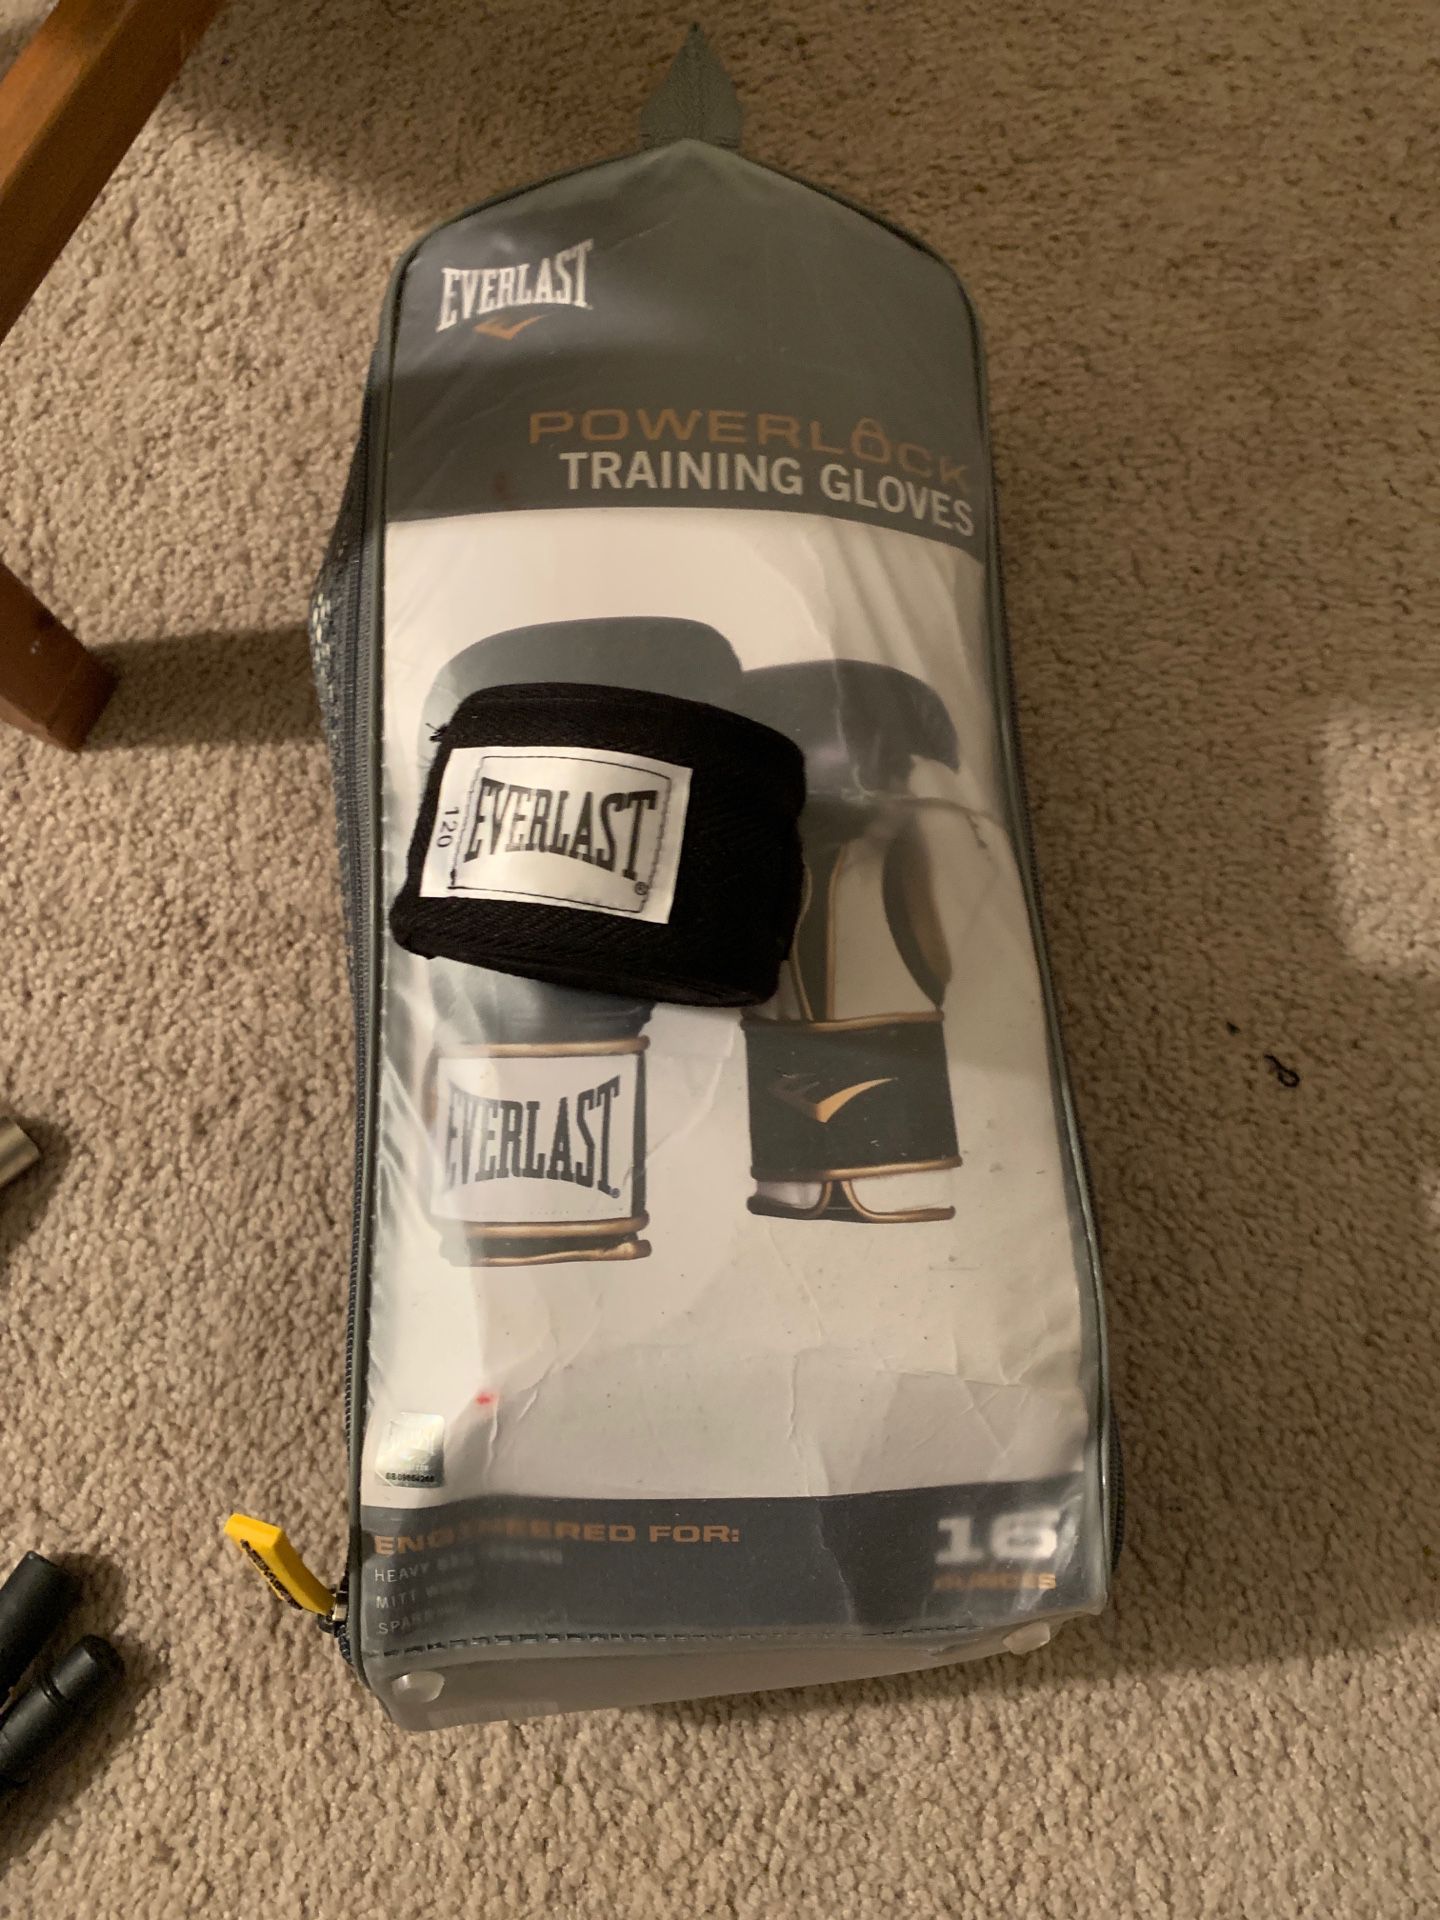 16oz everlast boxing training gloves with one wrap.